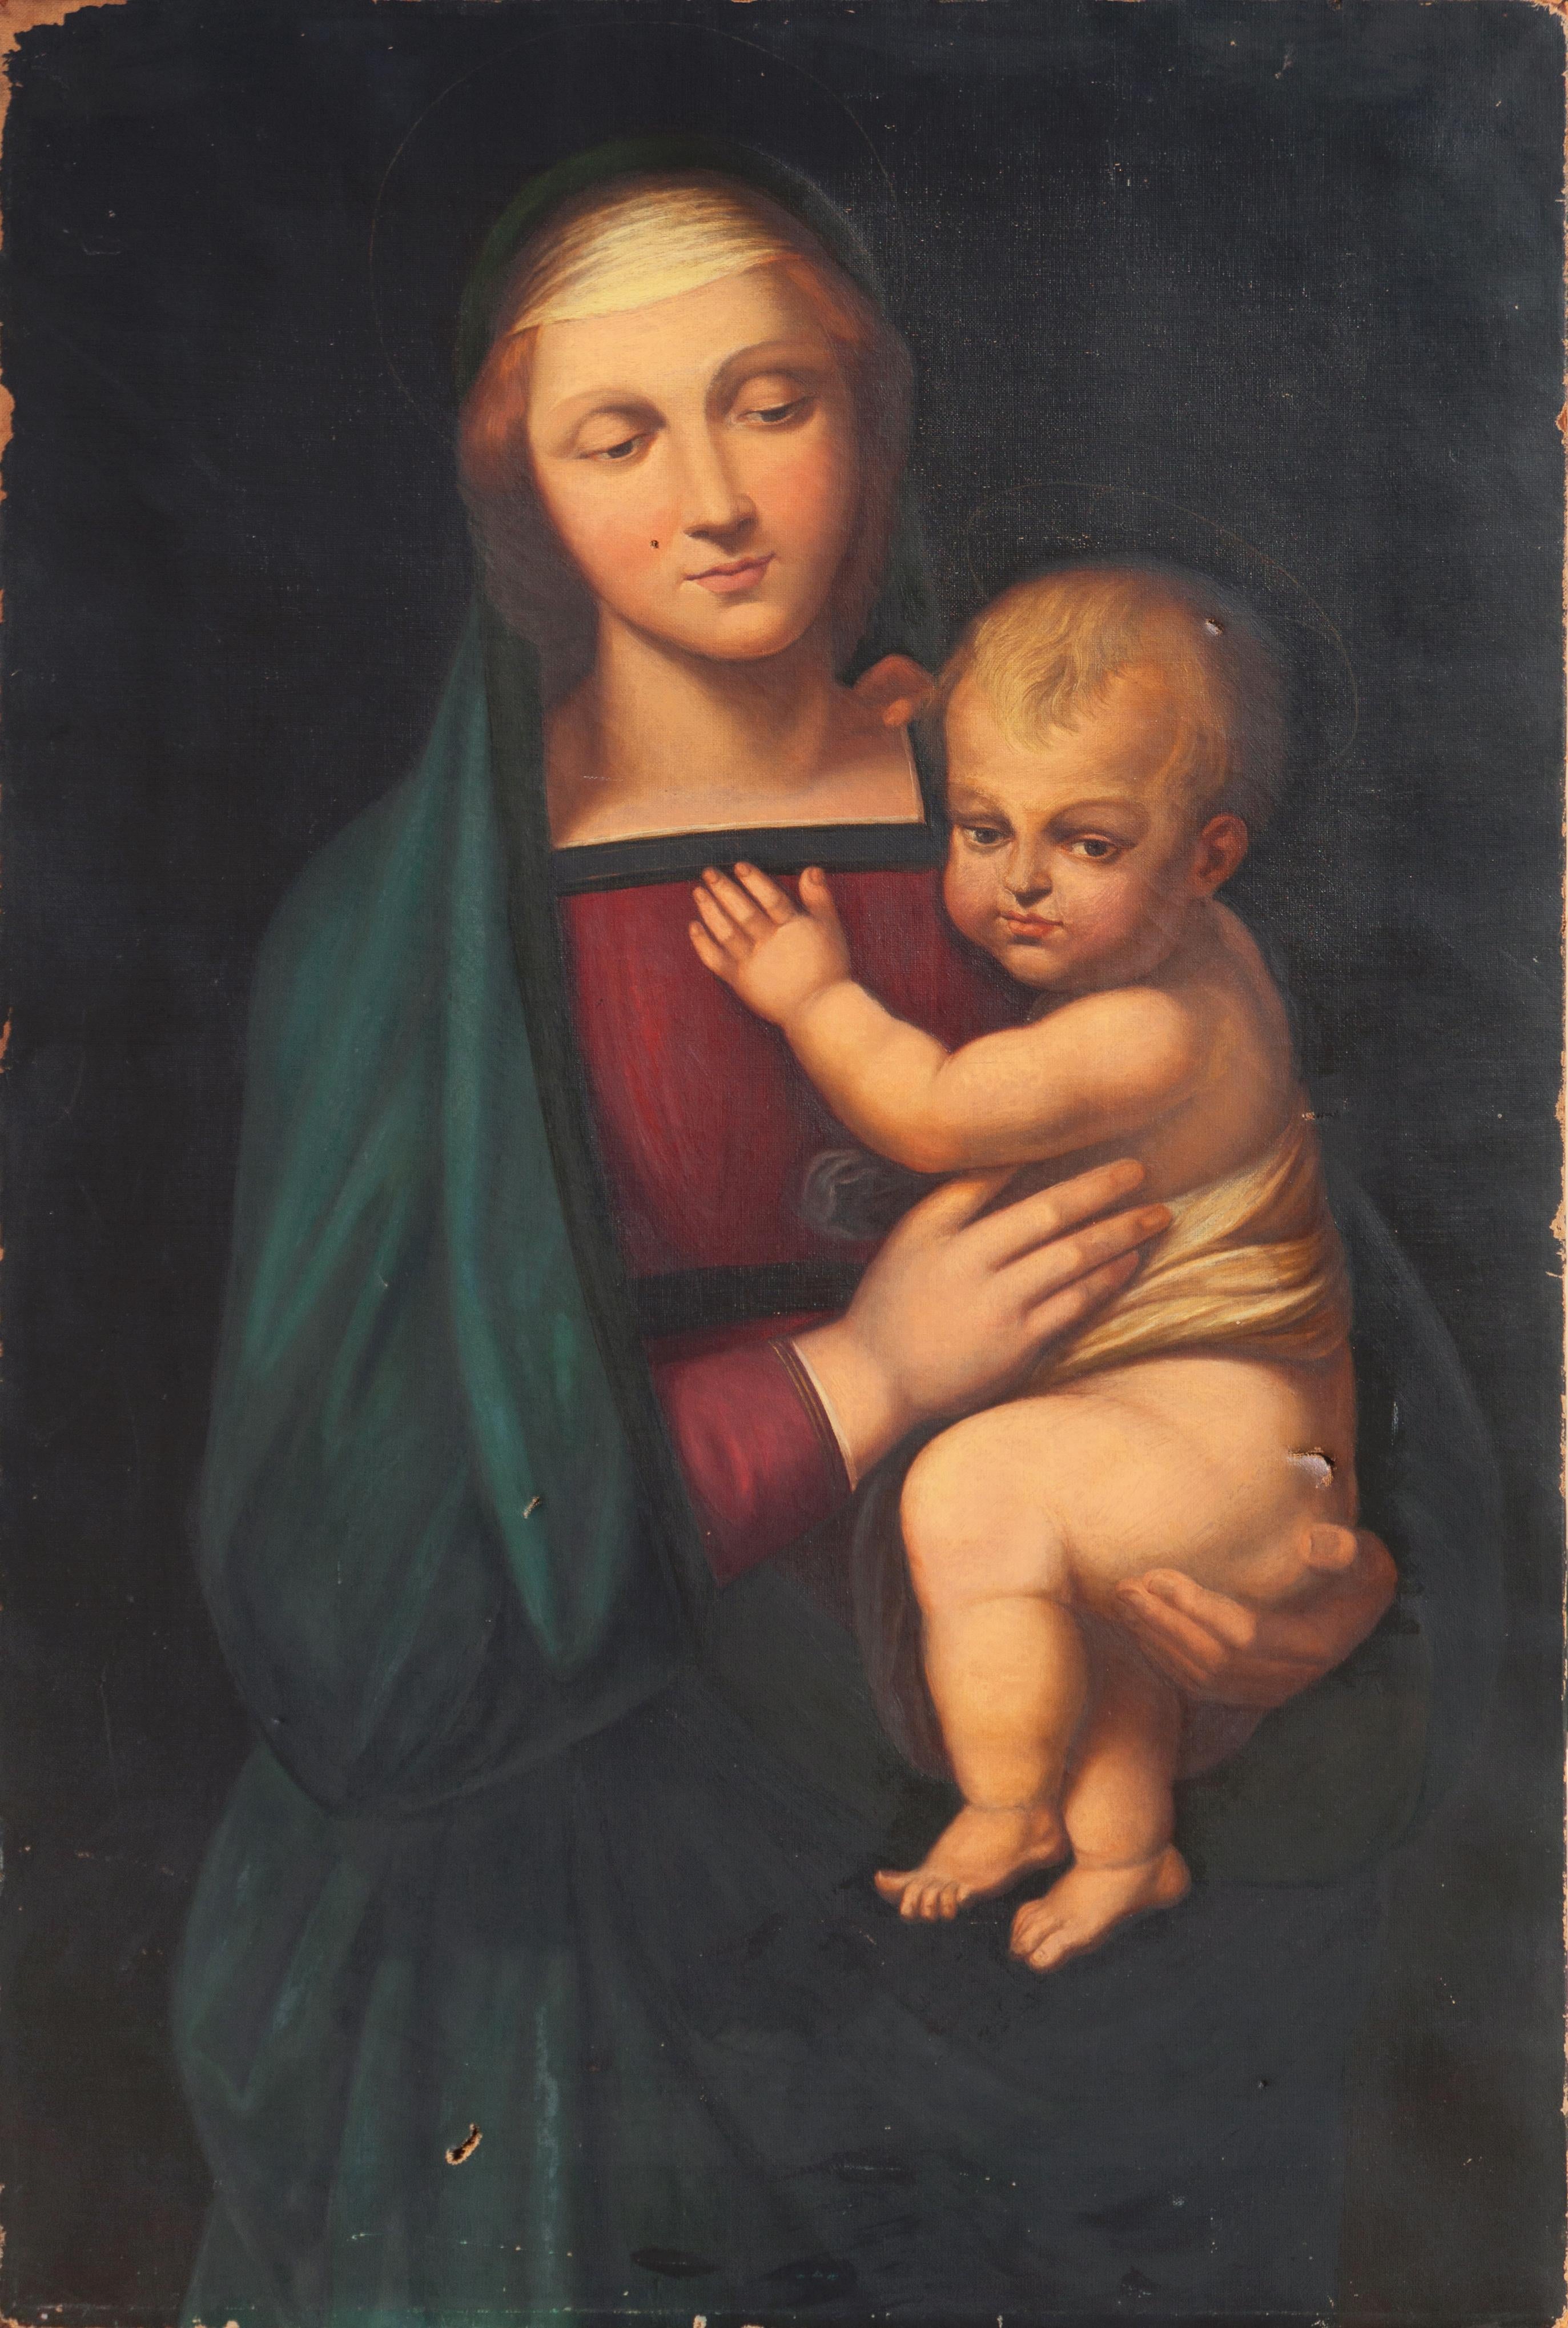 Unknown Portrait Painting - 'Madonna and Child', Large oil after Raphael, Italian Renaissance, Urbino